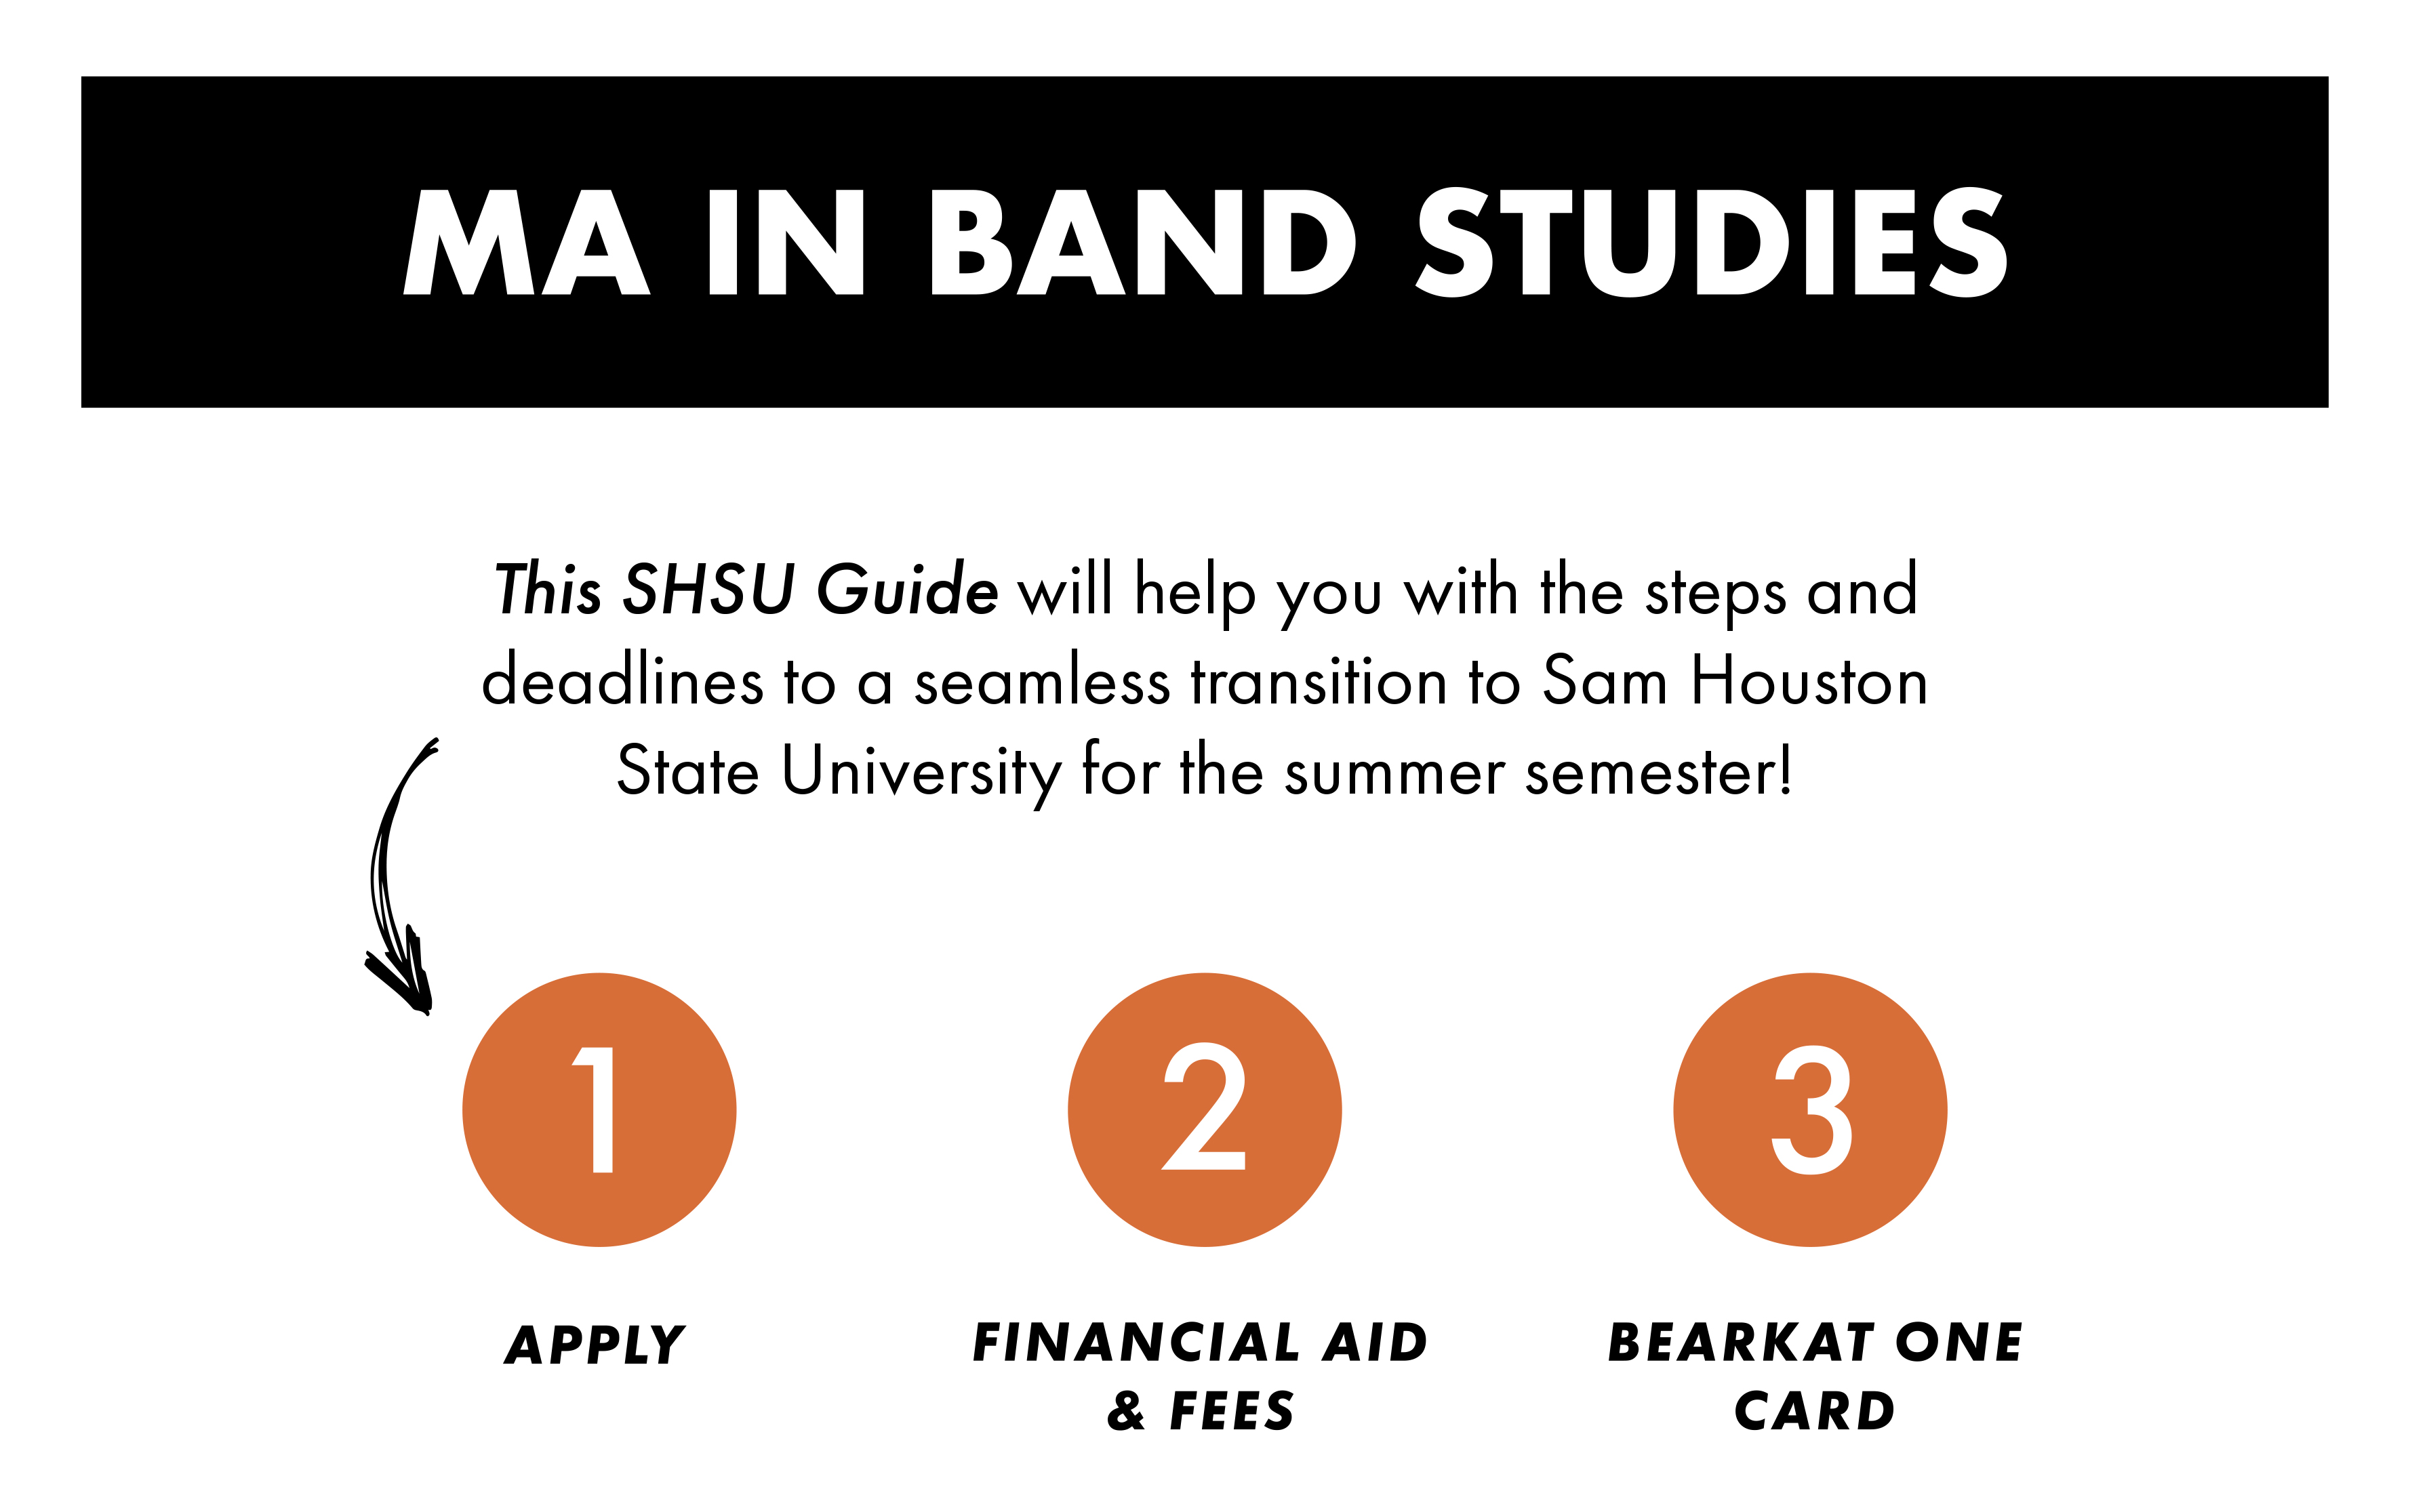 This SHSU Guide will help you with the steps and deadlines to a seamless transition to Sam Houston State University for the summer semester! 1- Apply, 2- Financial Aid & Fees, 3- Bearkat One Card